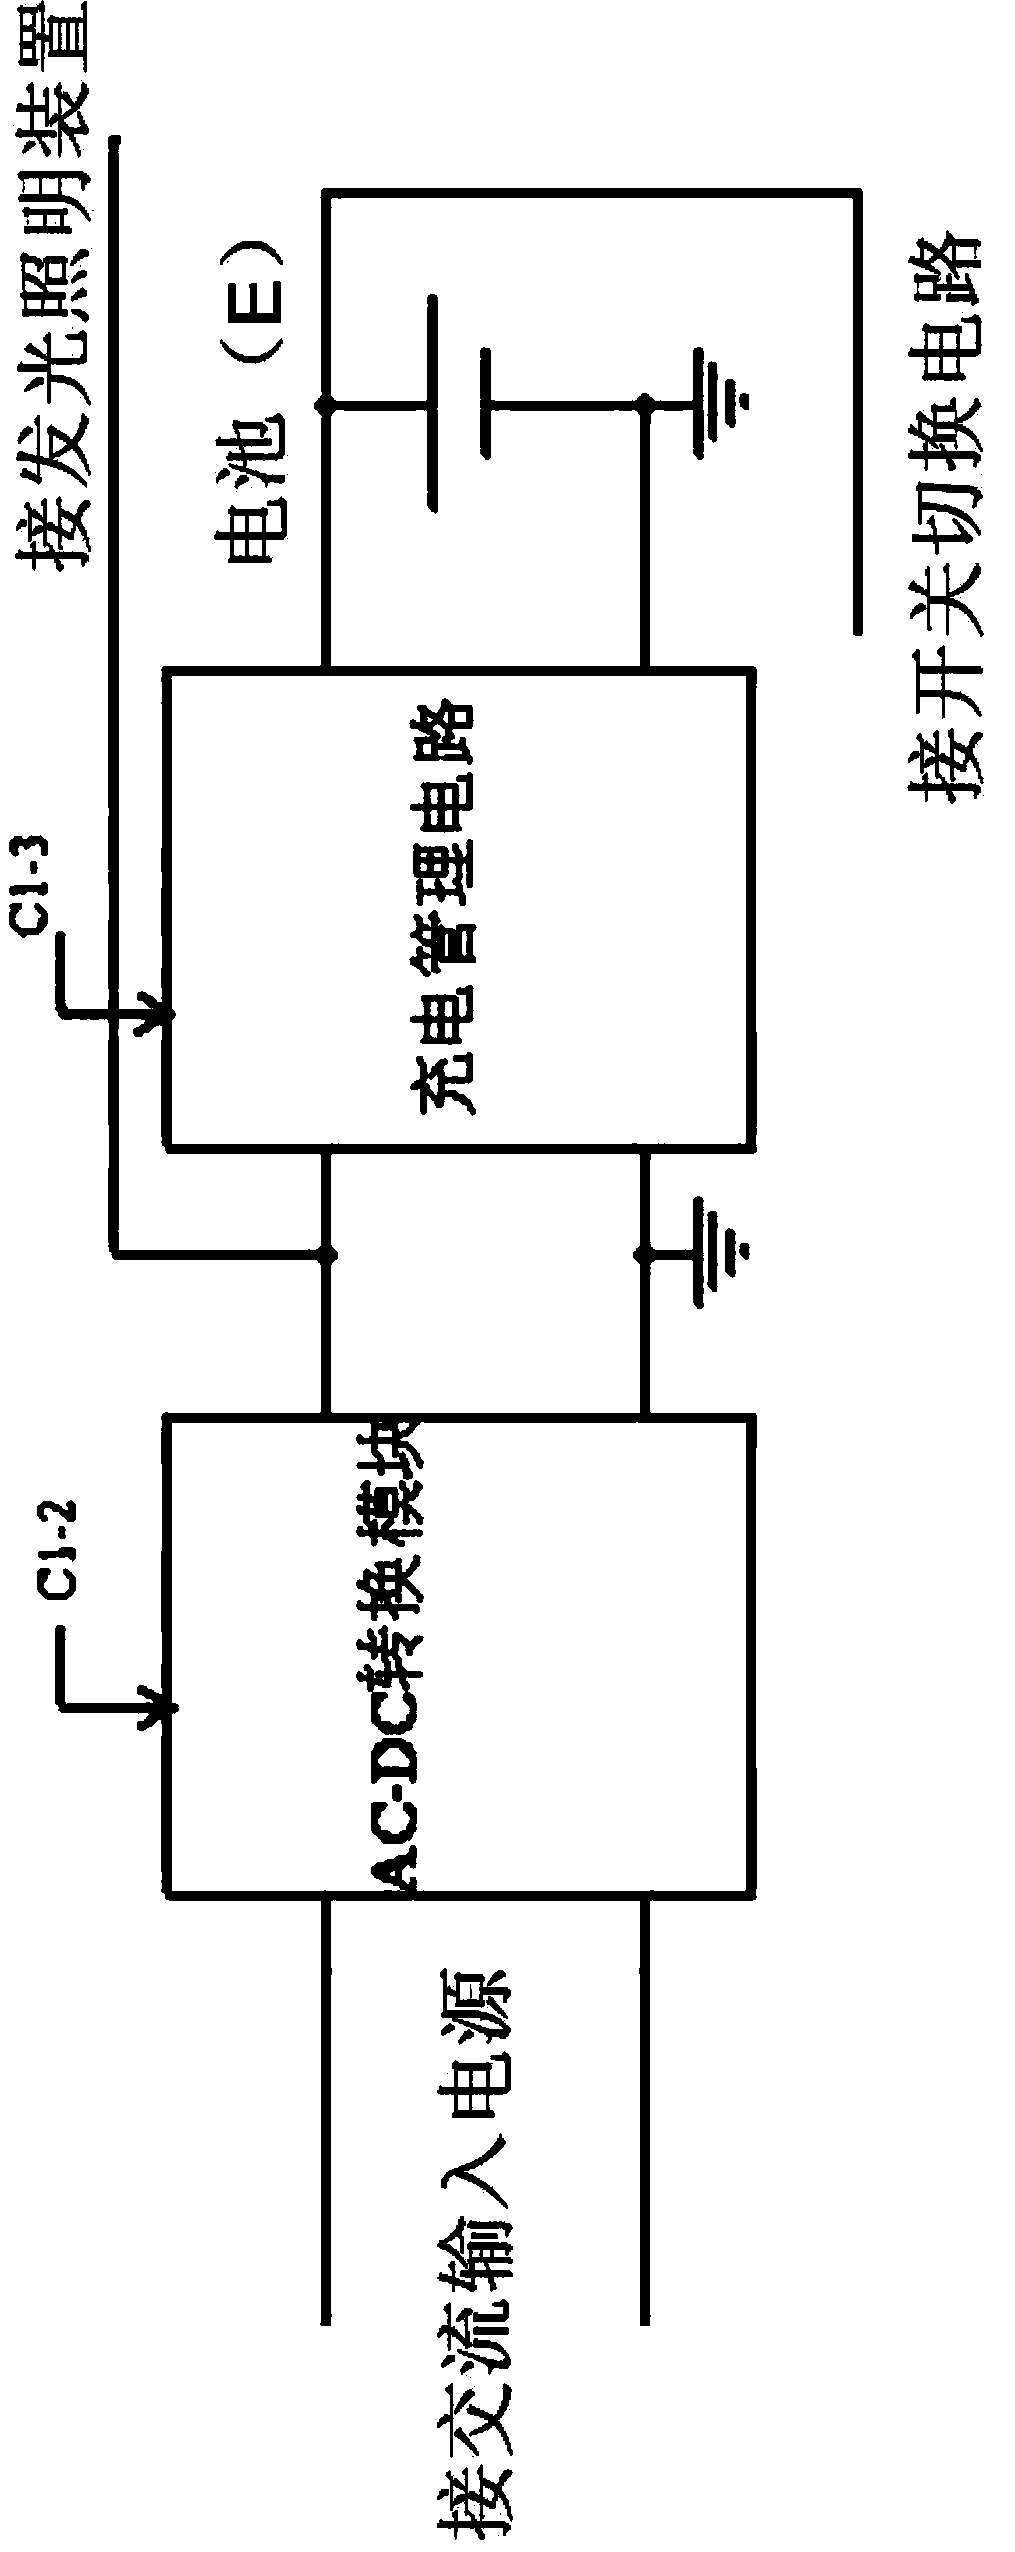 Emergency lighting device based on small electric signals in detection circuit